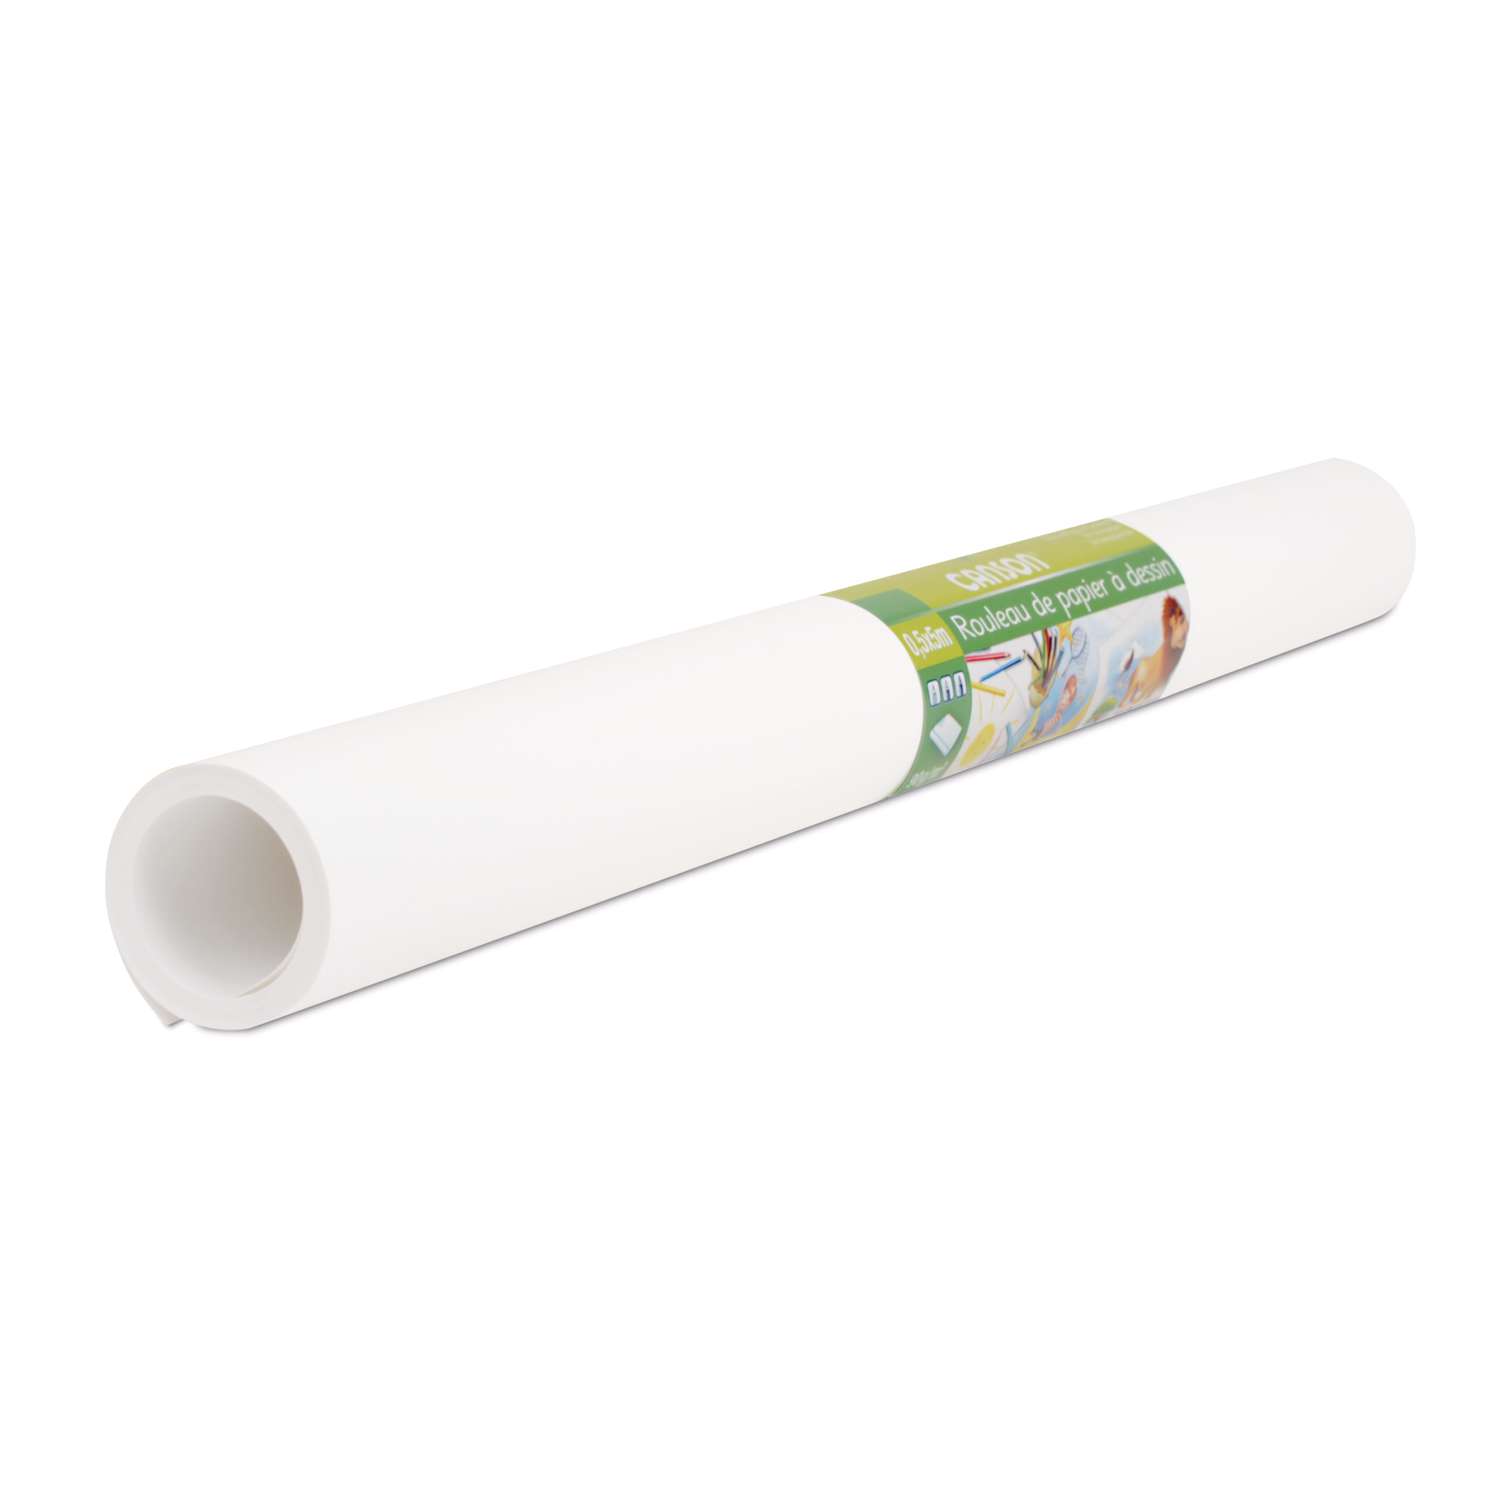 5/5m Crafts White Easel Paper Roll Children's Drawing